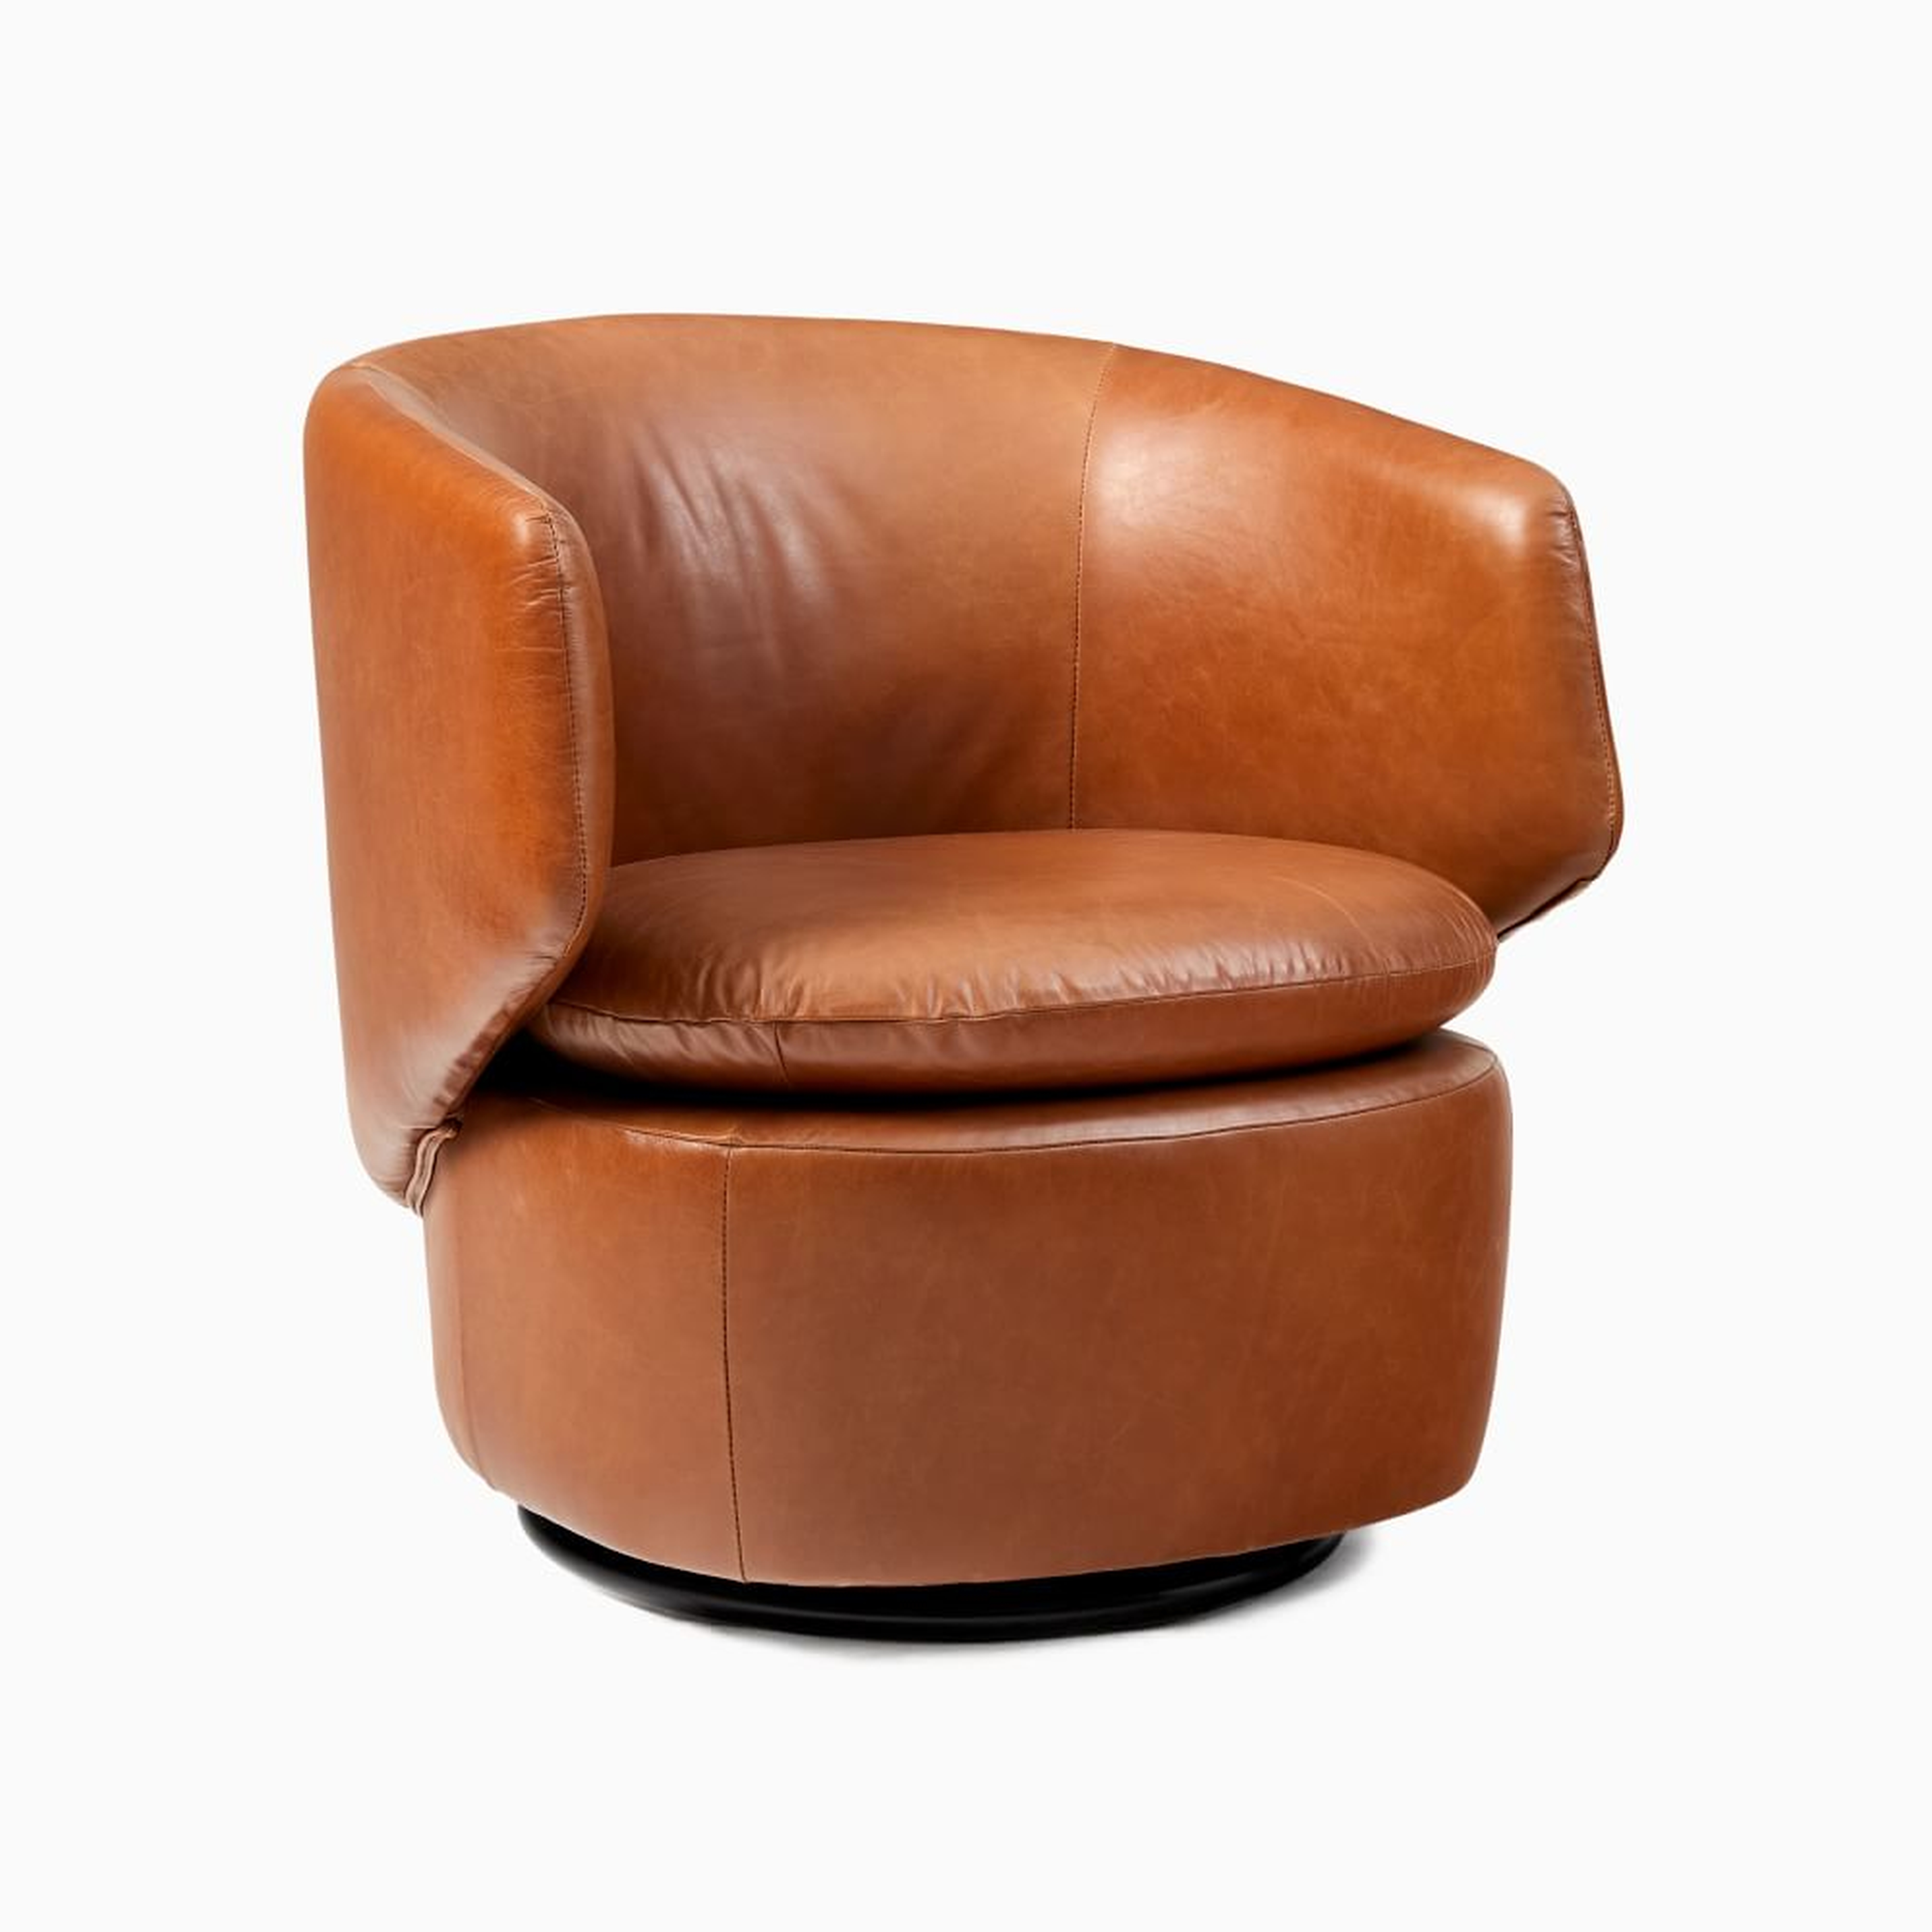 Crescent Swivel Chair, Poly, Saddle Leather, Nut - West Elm